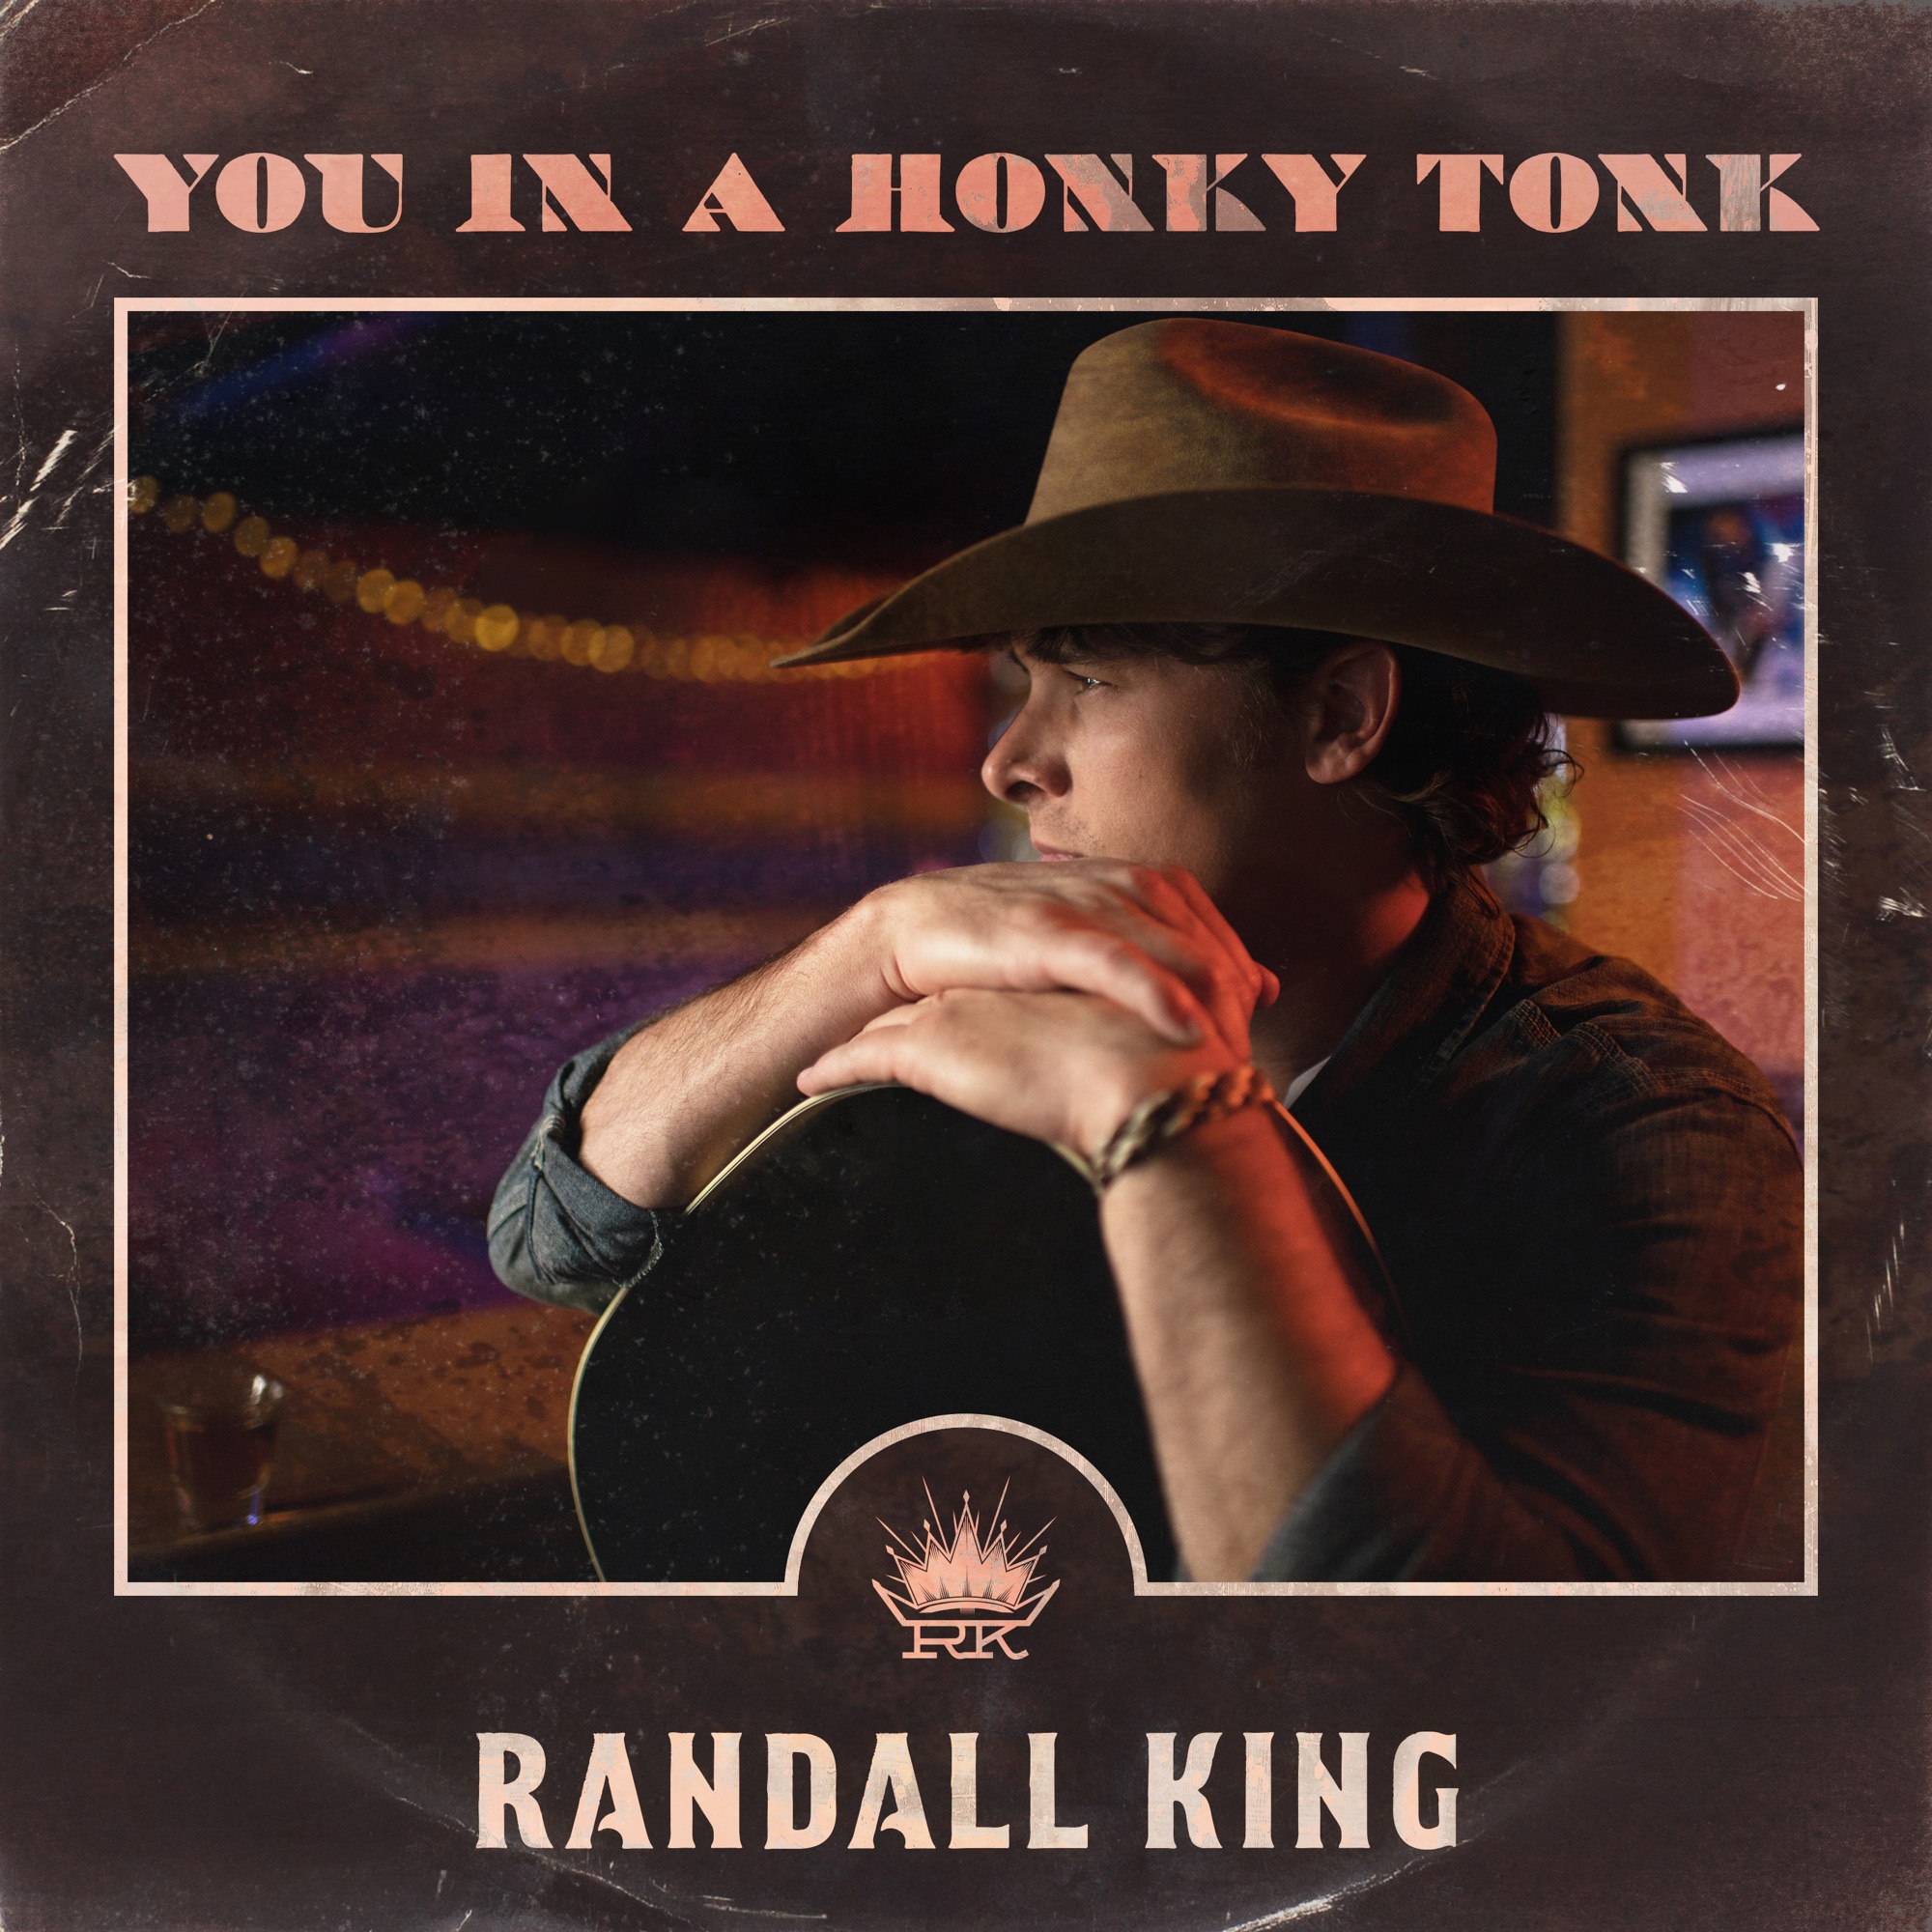 Art for You In A Honky Tonk by Randall King